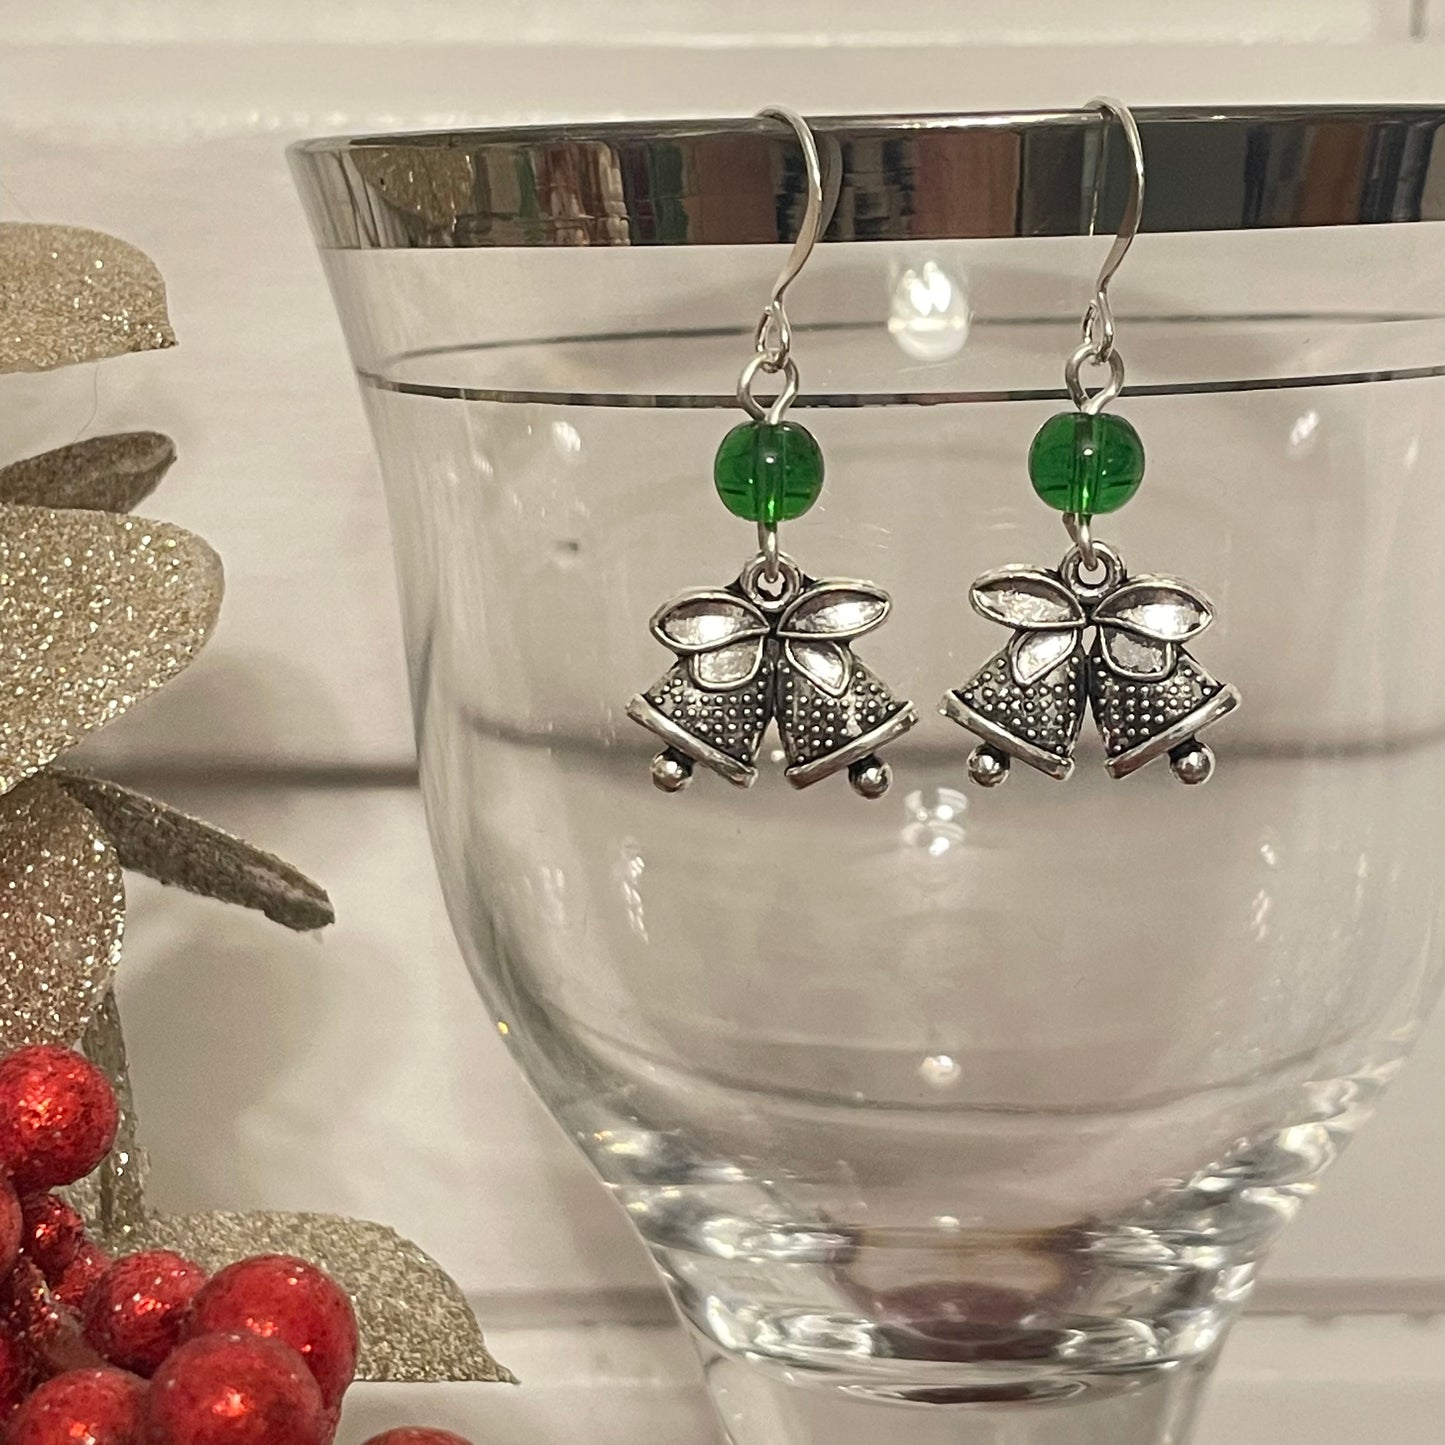 Handmade Bell Charm Earrings Round Bead Accent Holiday Christmas Stocking December Secret Santa Mixed Metal Green Glass